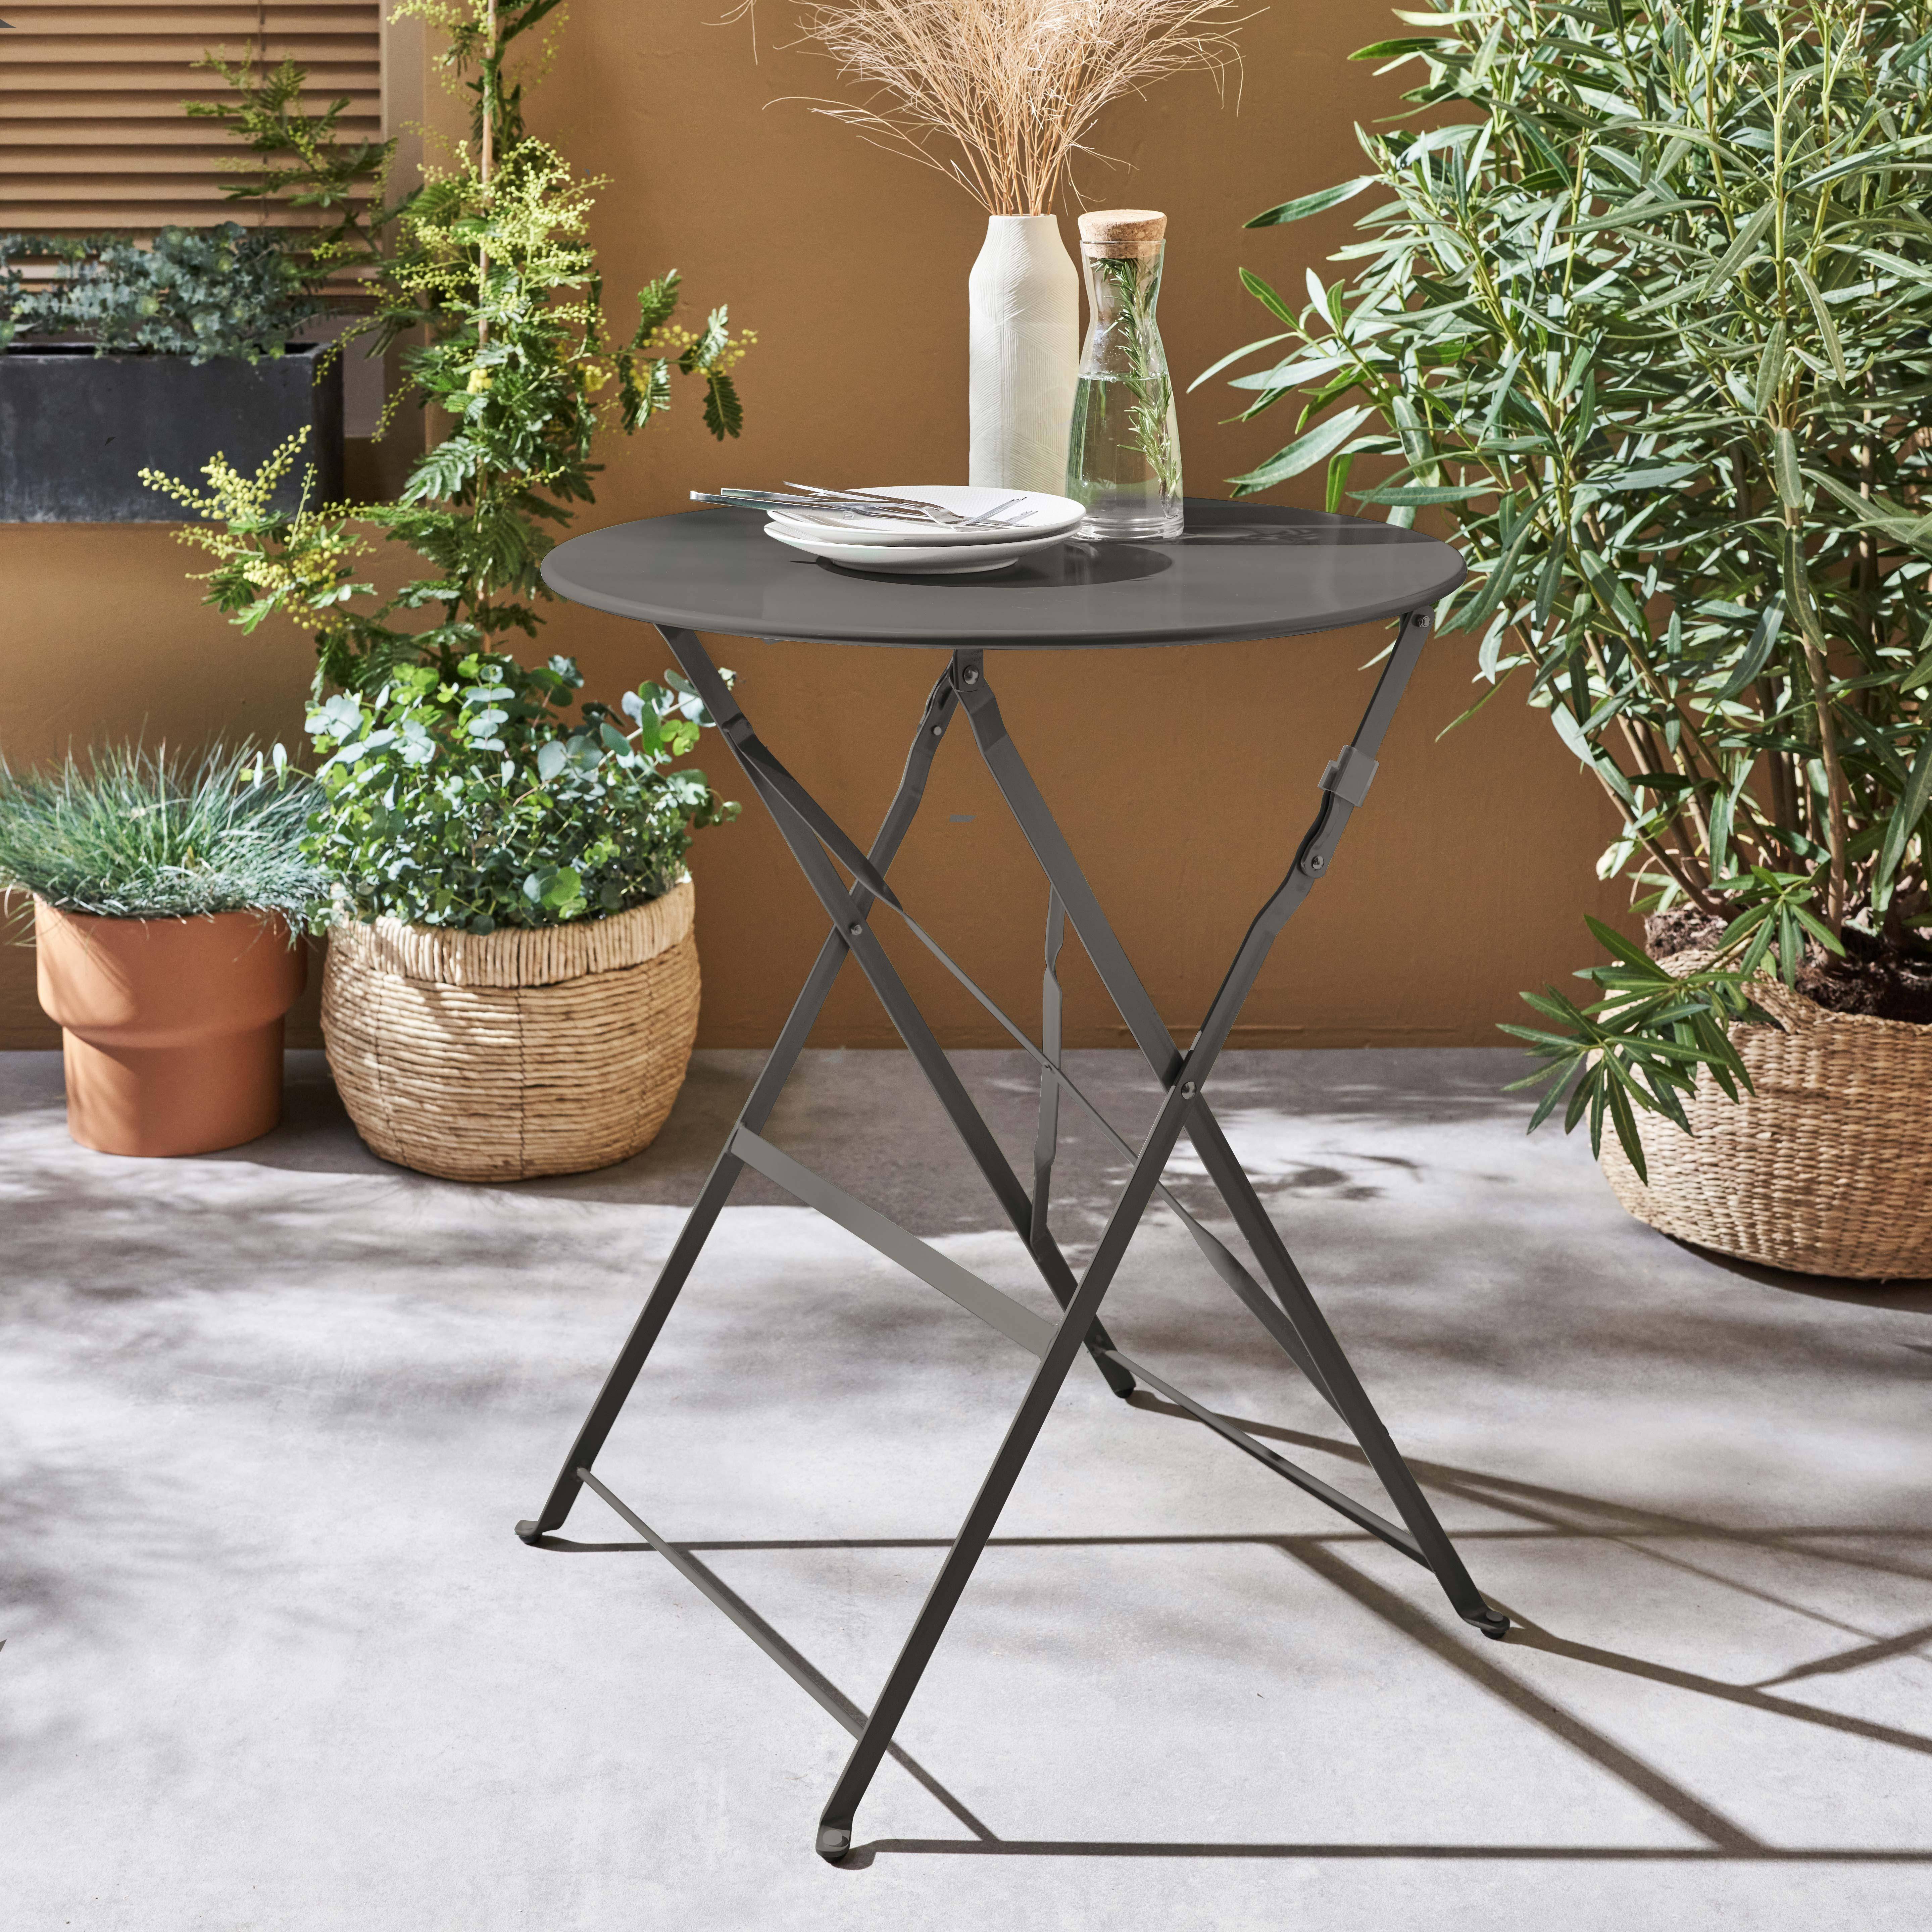 Foldable bistro garden table - Round Emilia anthracite- Round table Ø60cm, thermo-lacquered steel,sweeek,Photo1